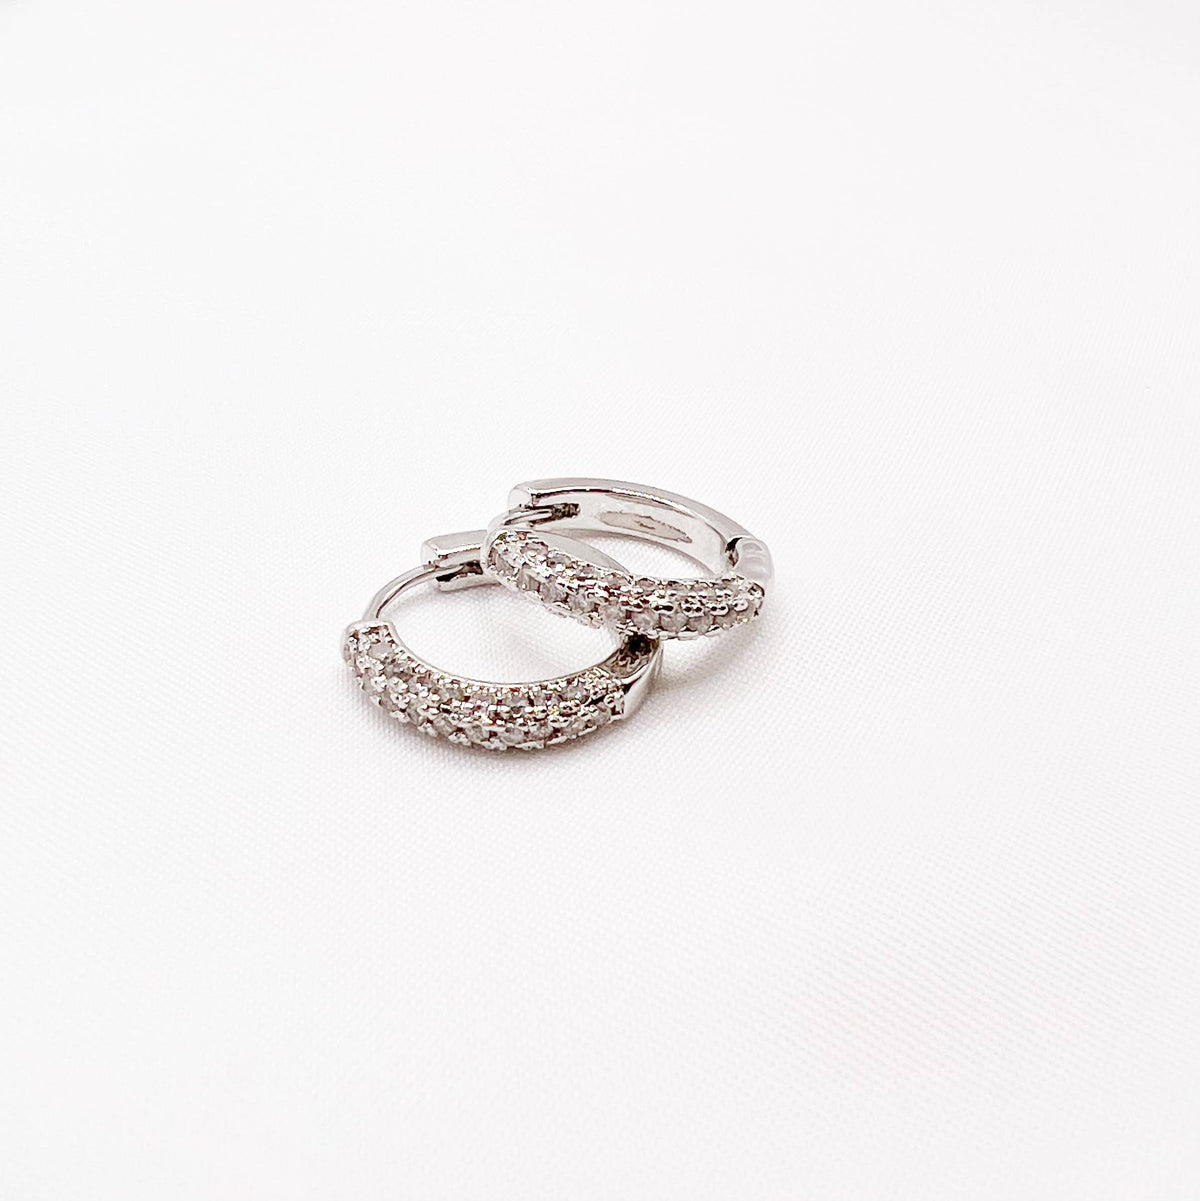 Glisten Pave Silver White Gold Filled Huggie Hoops Earrings